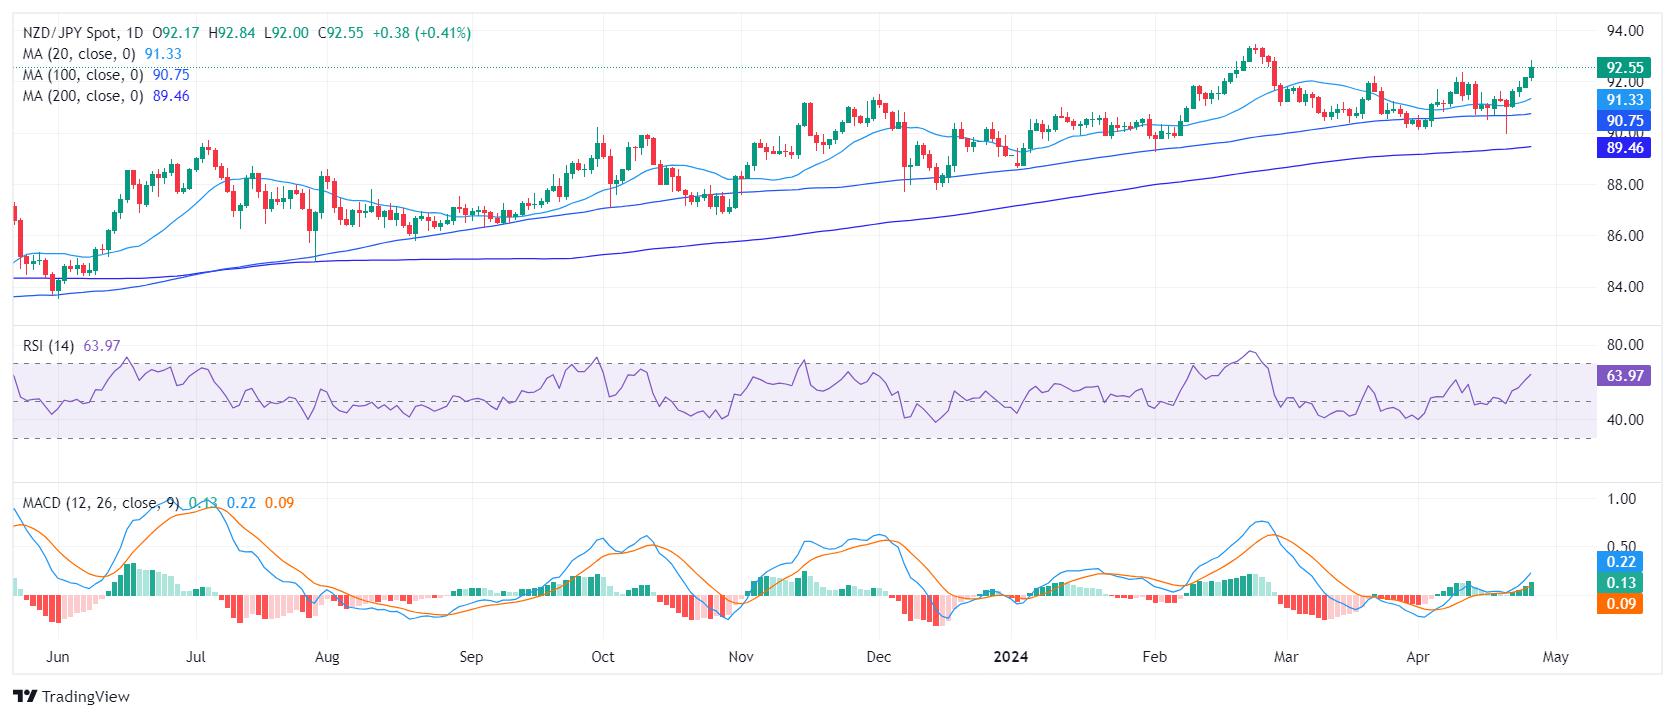 NZD/JPY Price Analysis: Bulls don’t give up and continue climbing, might be time for a correction